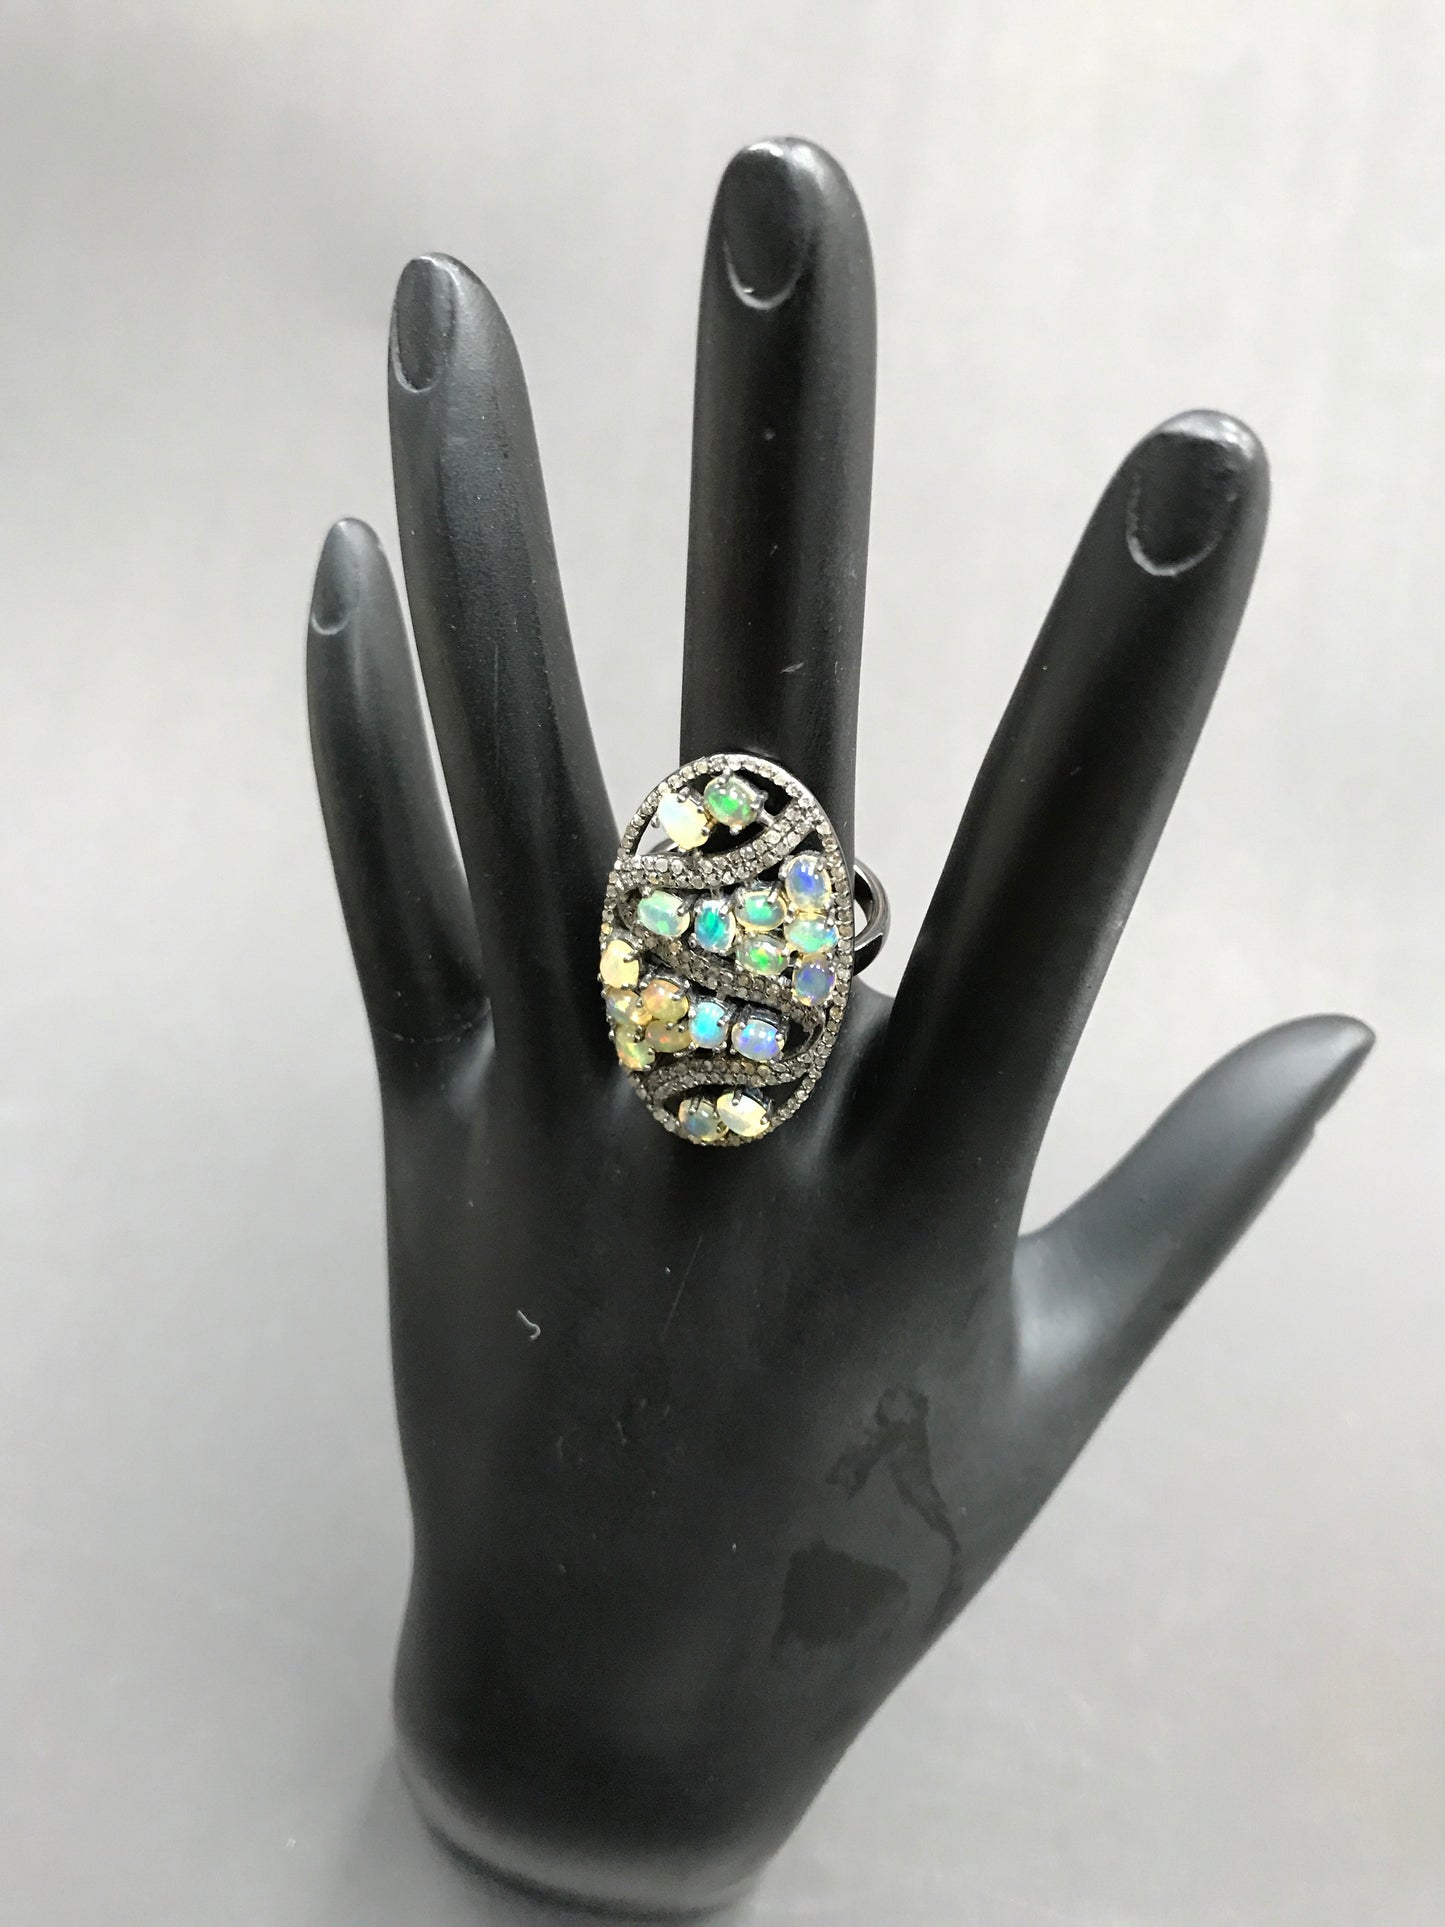 Oval Designer Diamond And Ethopian Opal Ring,Pave Diamond Ring,Diamond Ring,Pave Ring, Statement Ring, Oxidised Silver